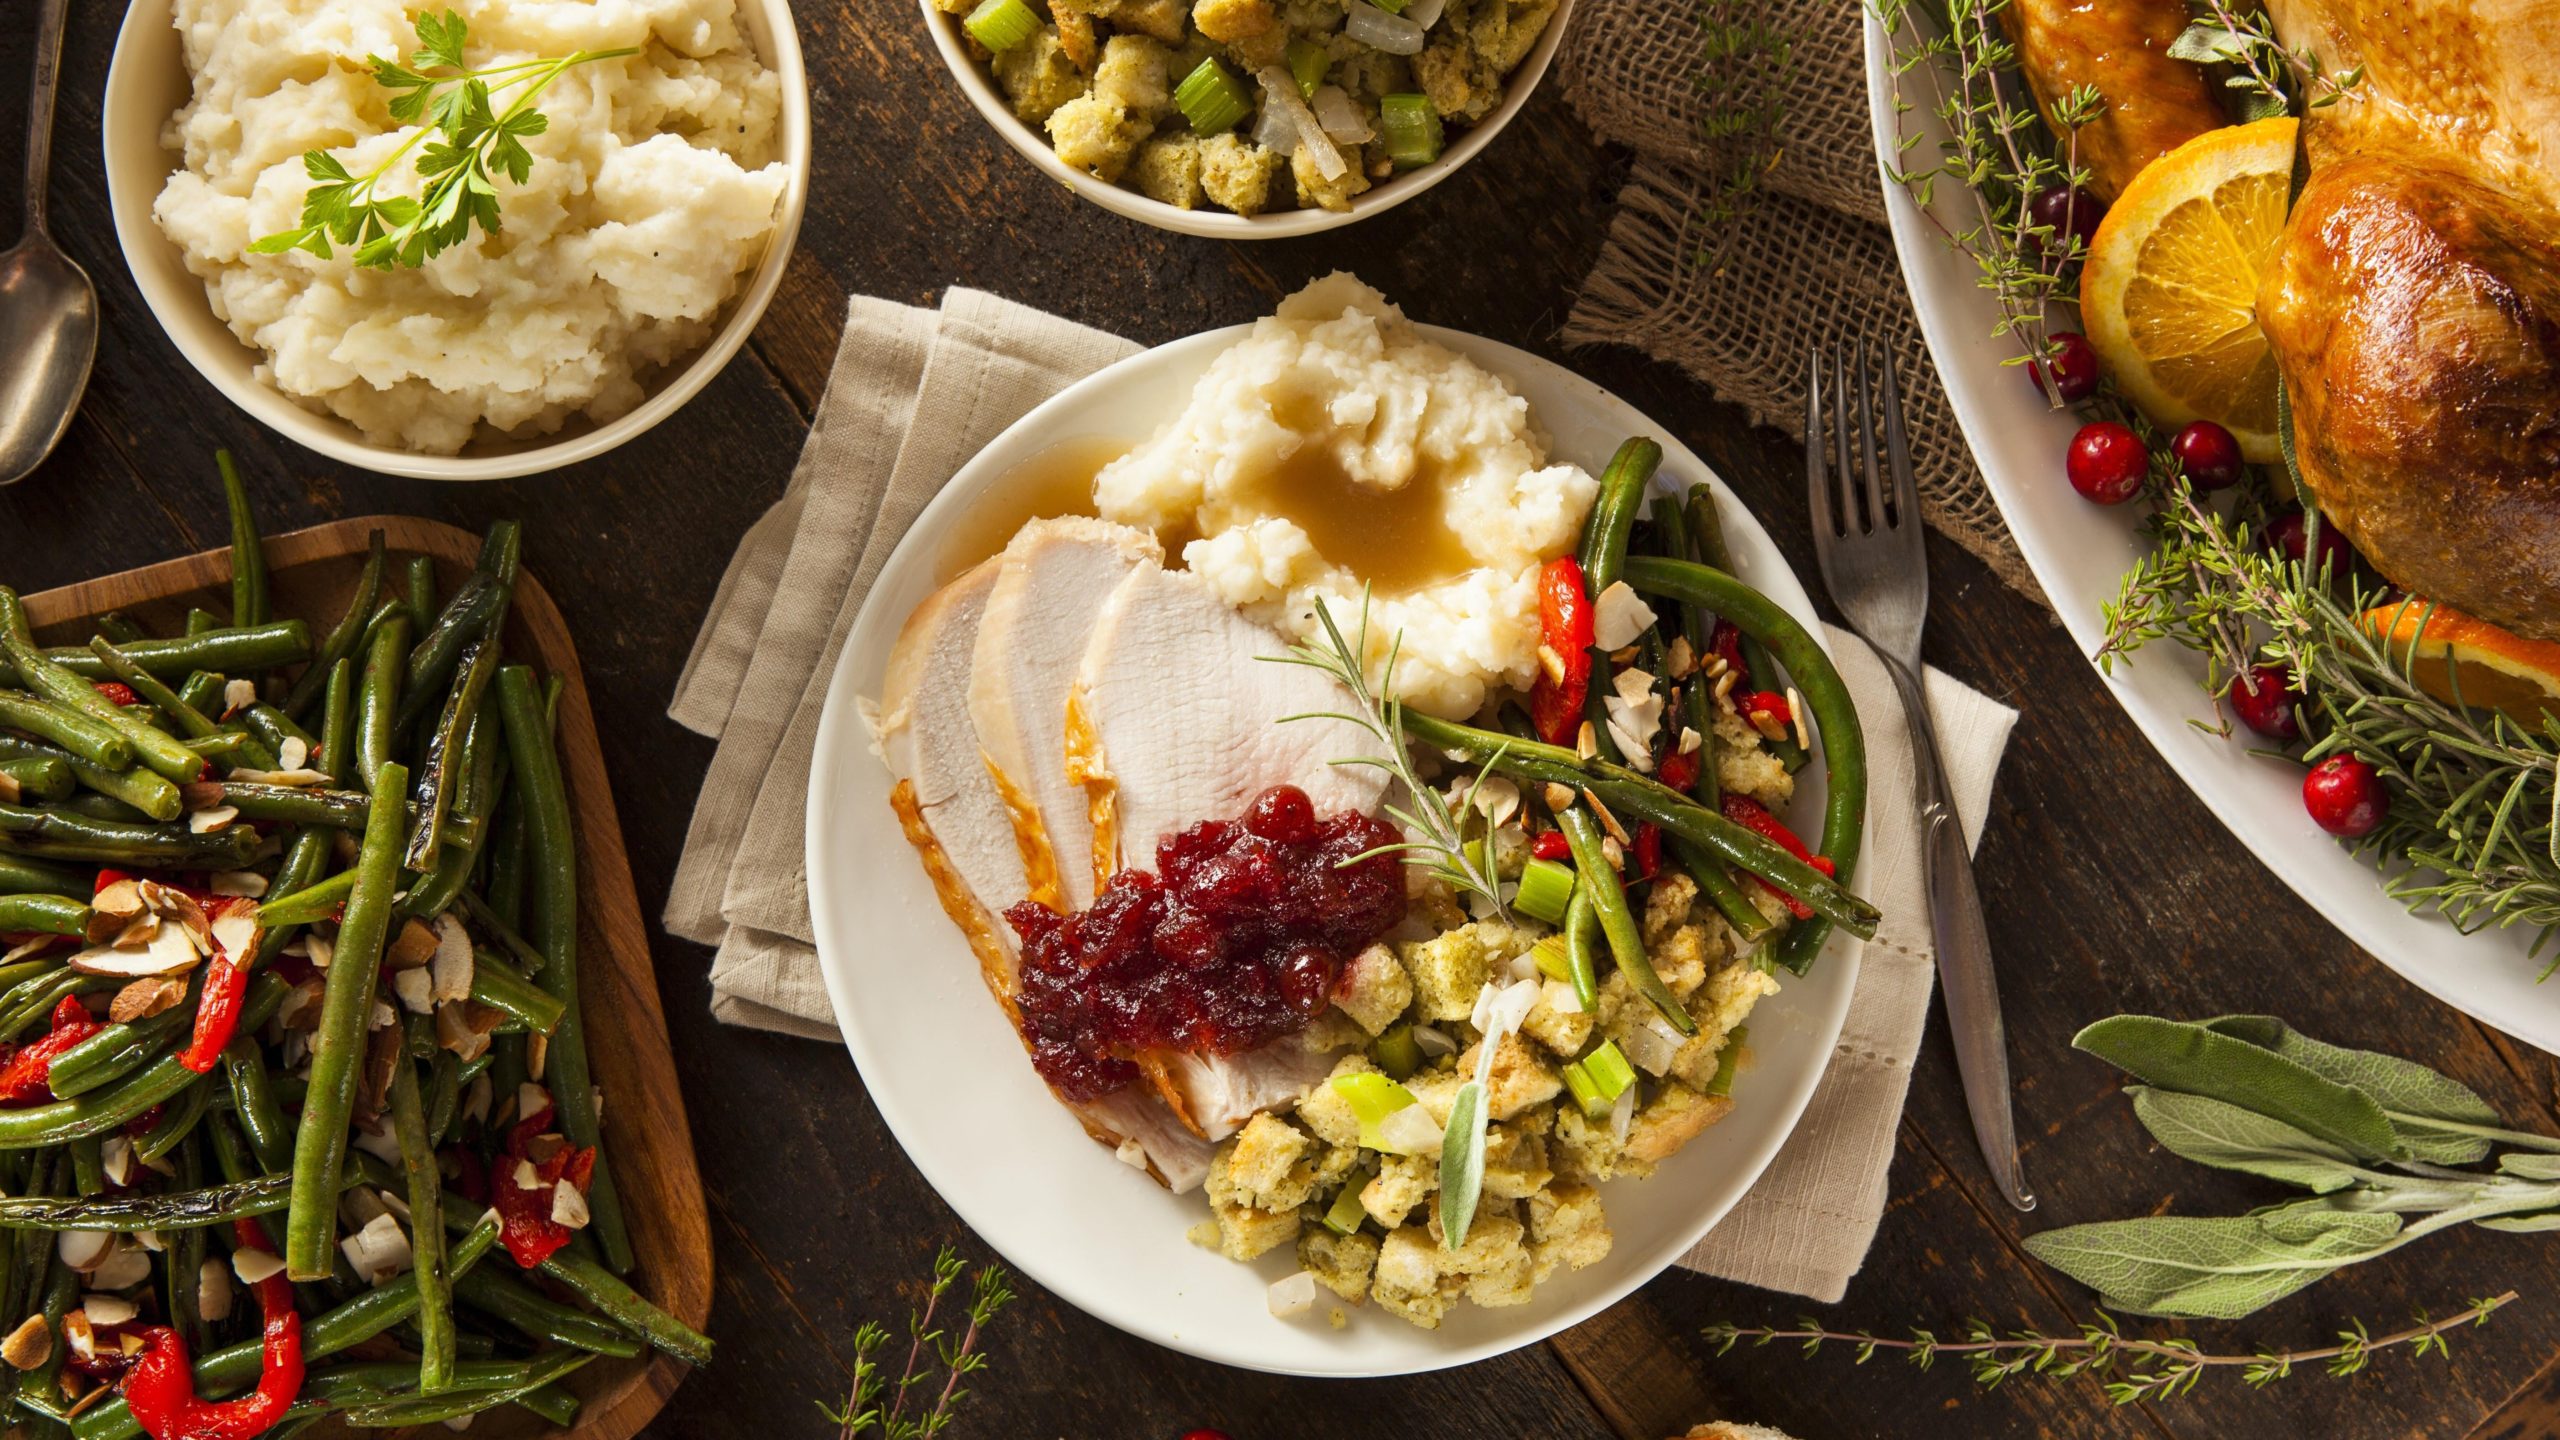 What You Should Do The Week Before Holiday Dinners